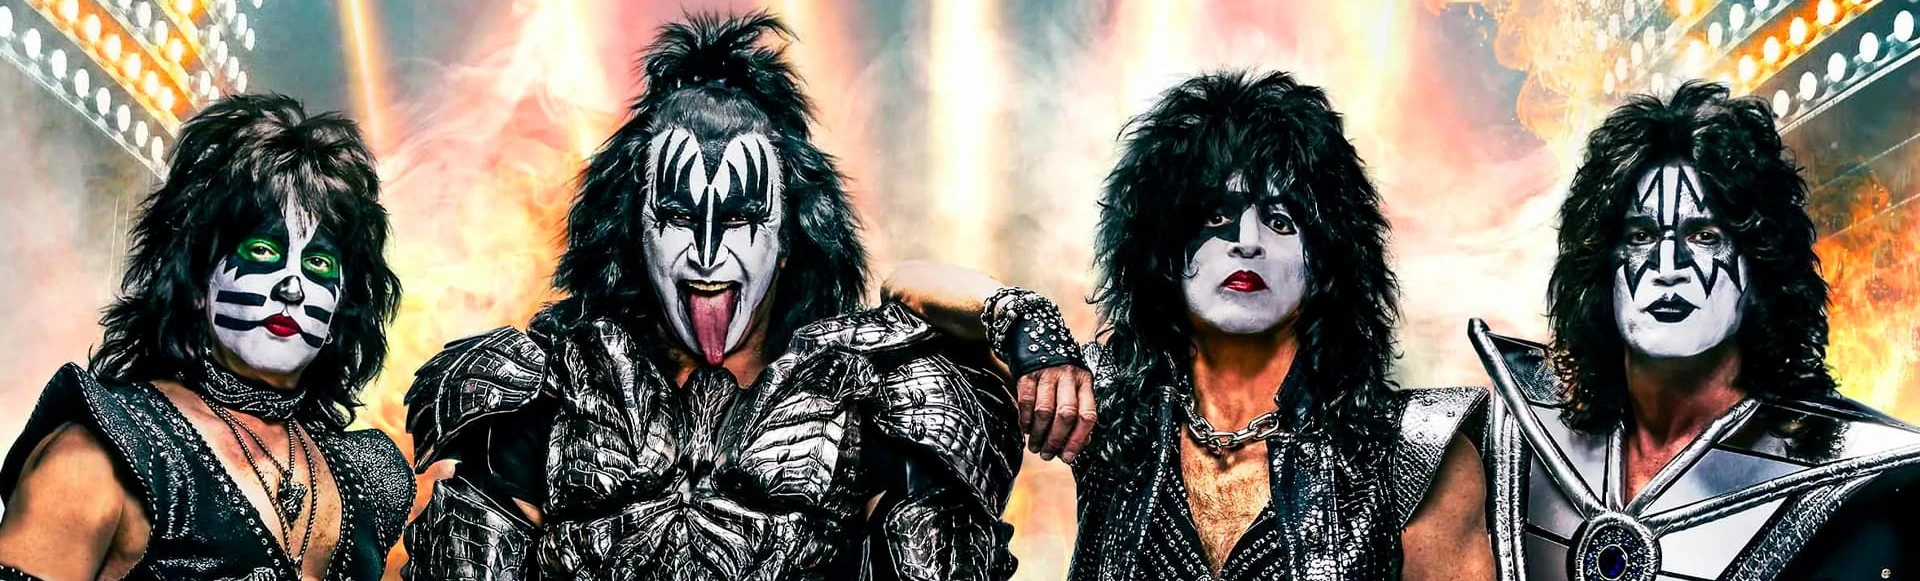 The legendary Kiss are preparing to blow up the Coca-Cola Arena stage in Dubai, UAE!